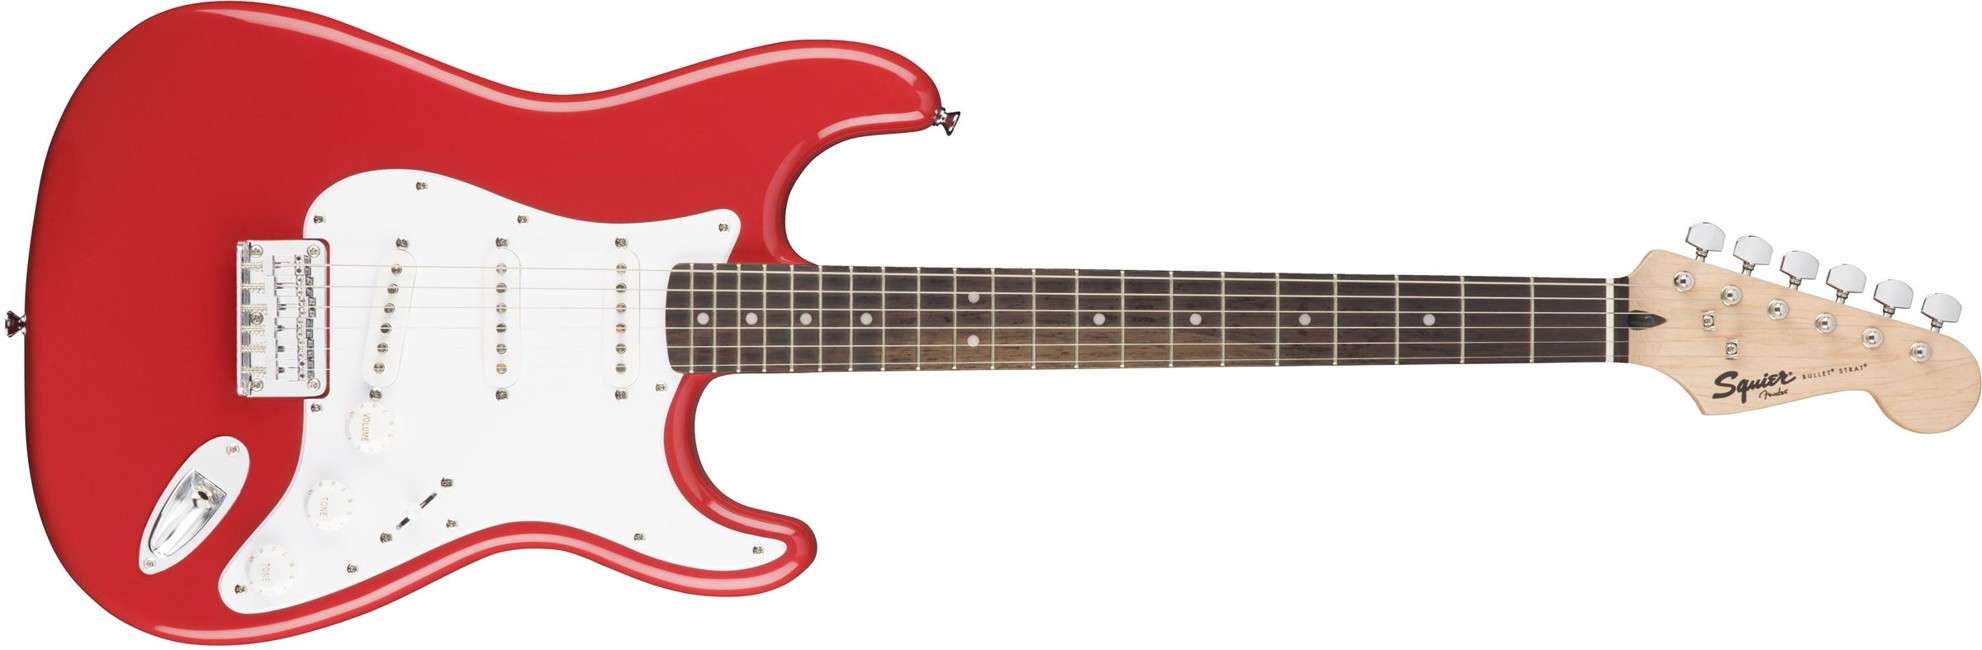 Squier By Fender - Bullet Stratocaster HT - Electric Guitar (Fiesta Red)